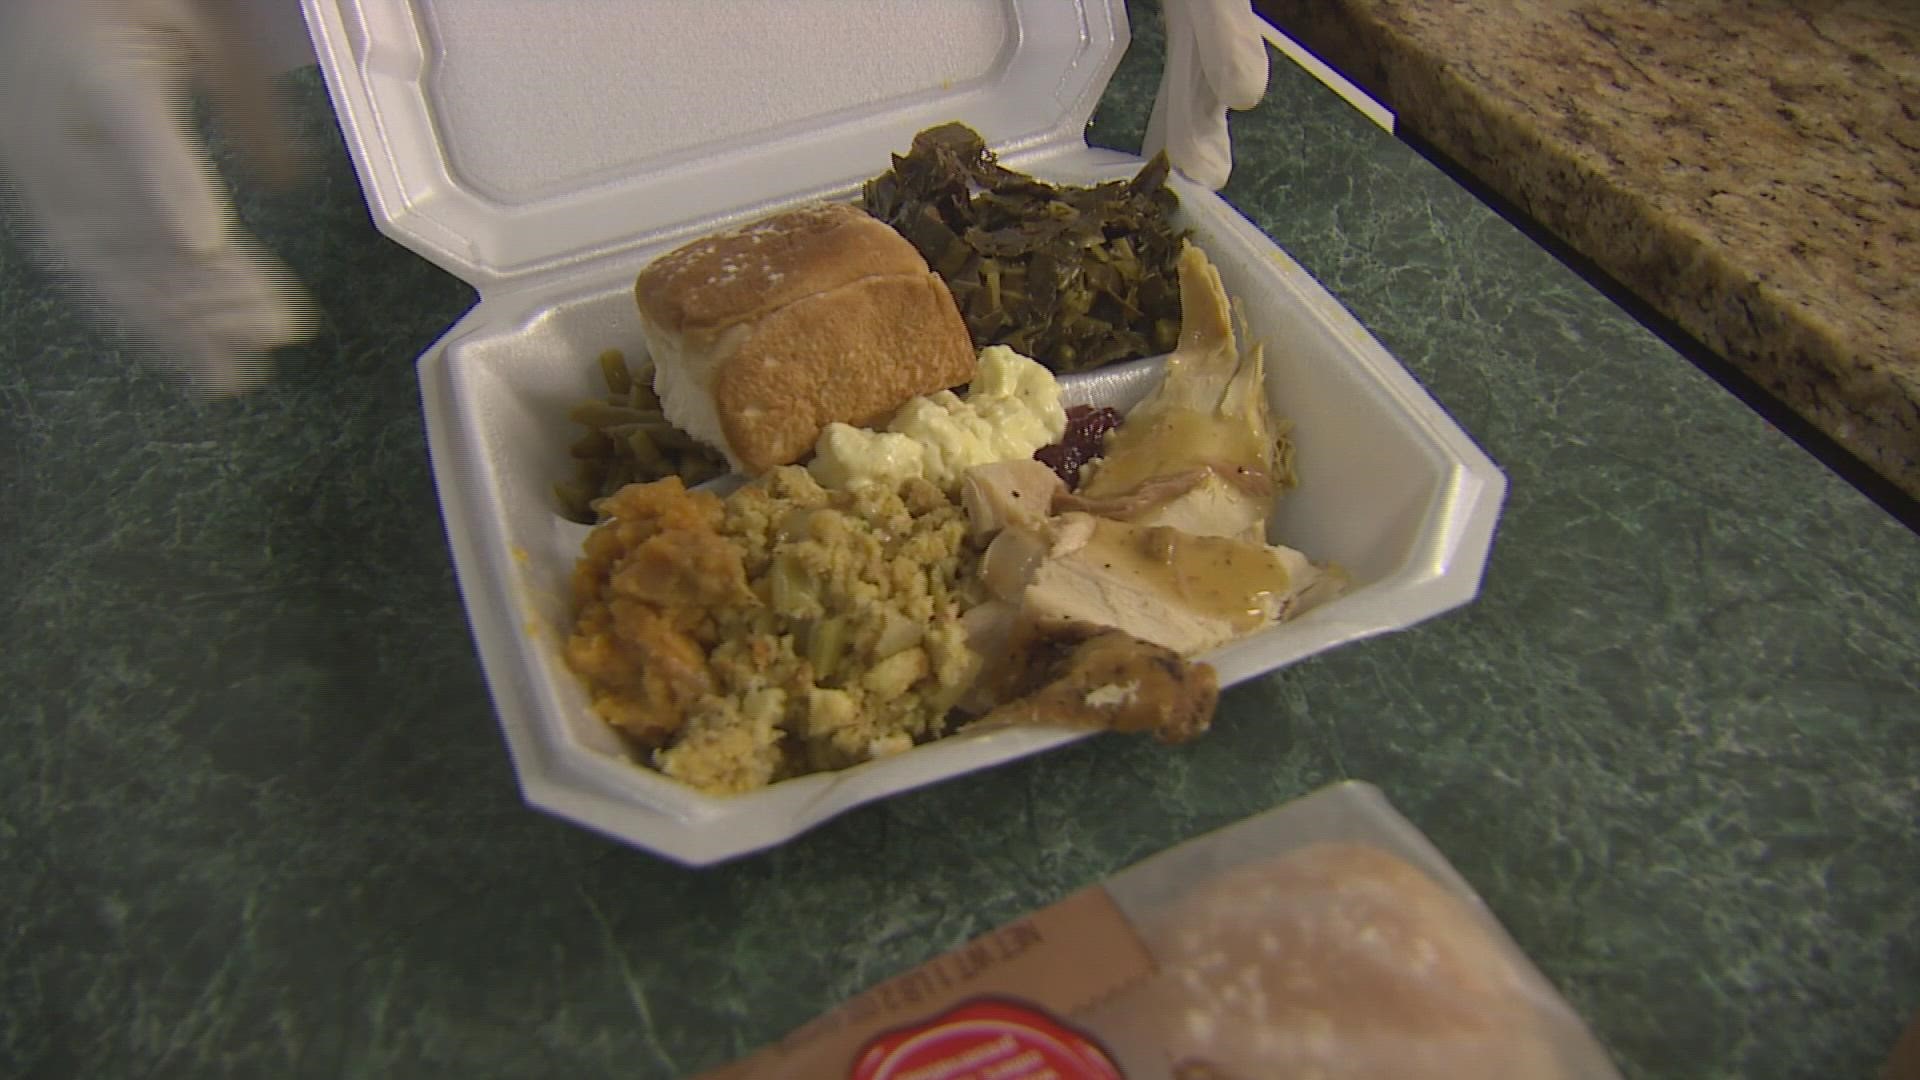 The Nora Lee Walker Foundation is making sure that everyone in Tacoma’s Hilltop neighborhood has a warm meal this Thanksgiving.